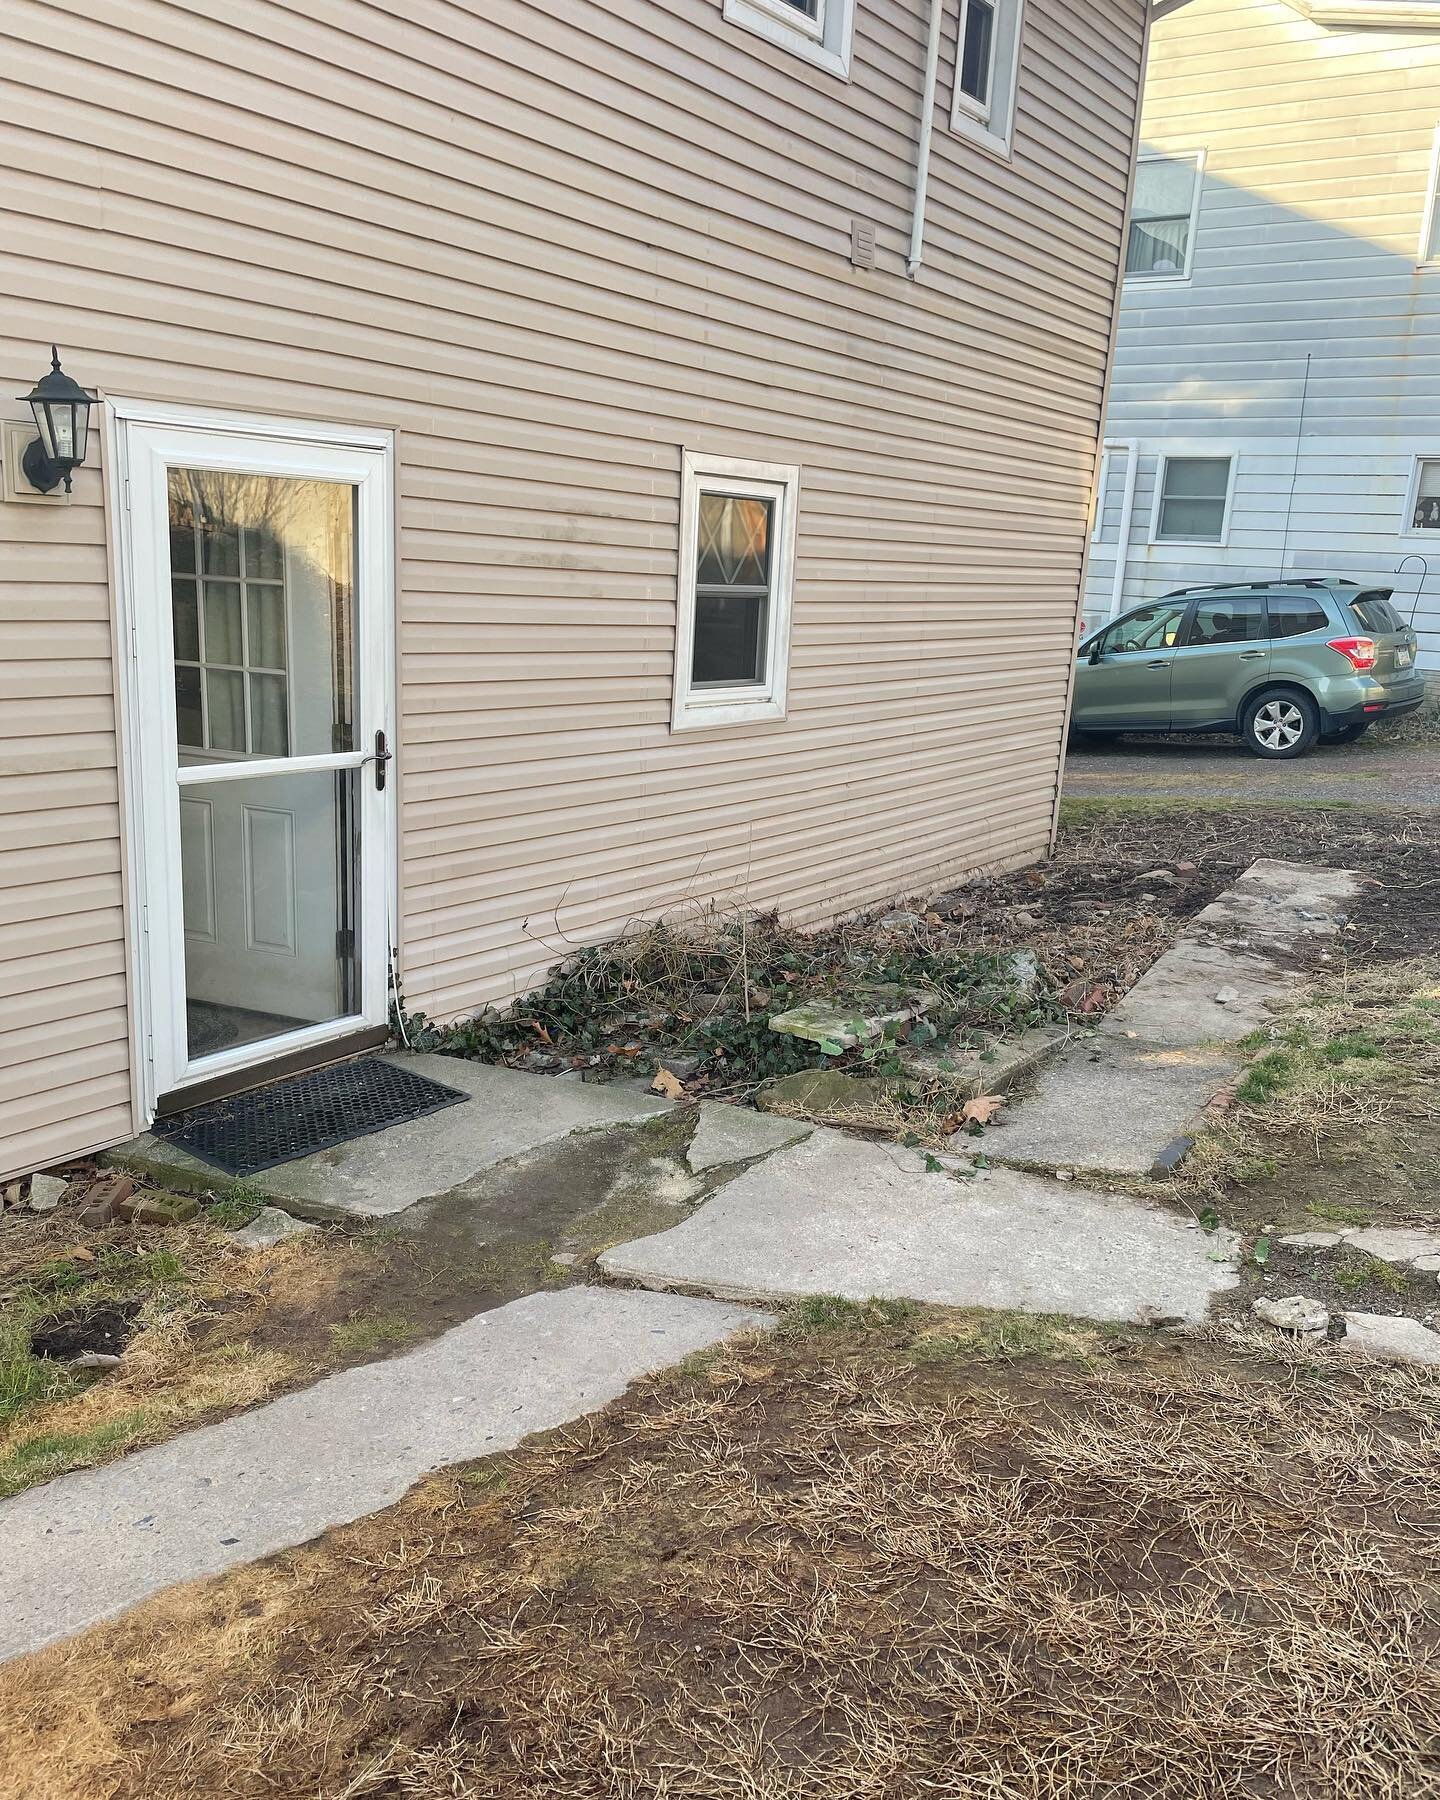 Before pics of the backyard/old sidewalks before the paver patio is installed. #before #bluemountainevergreen #excited